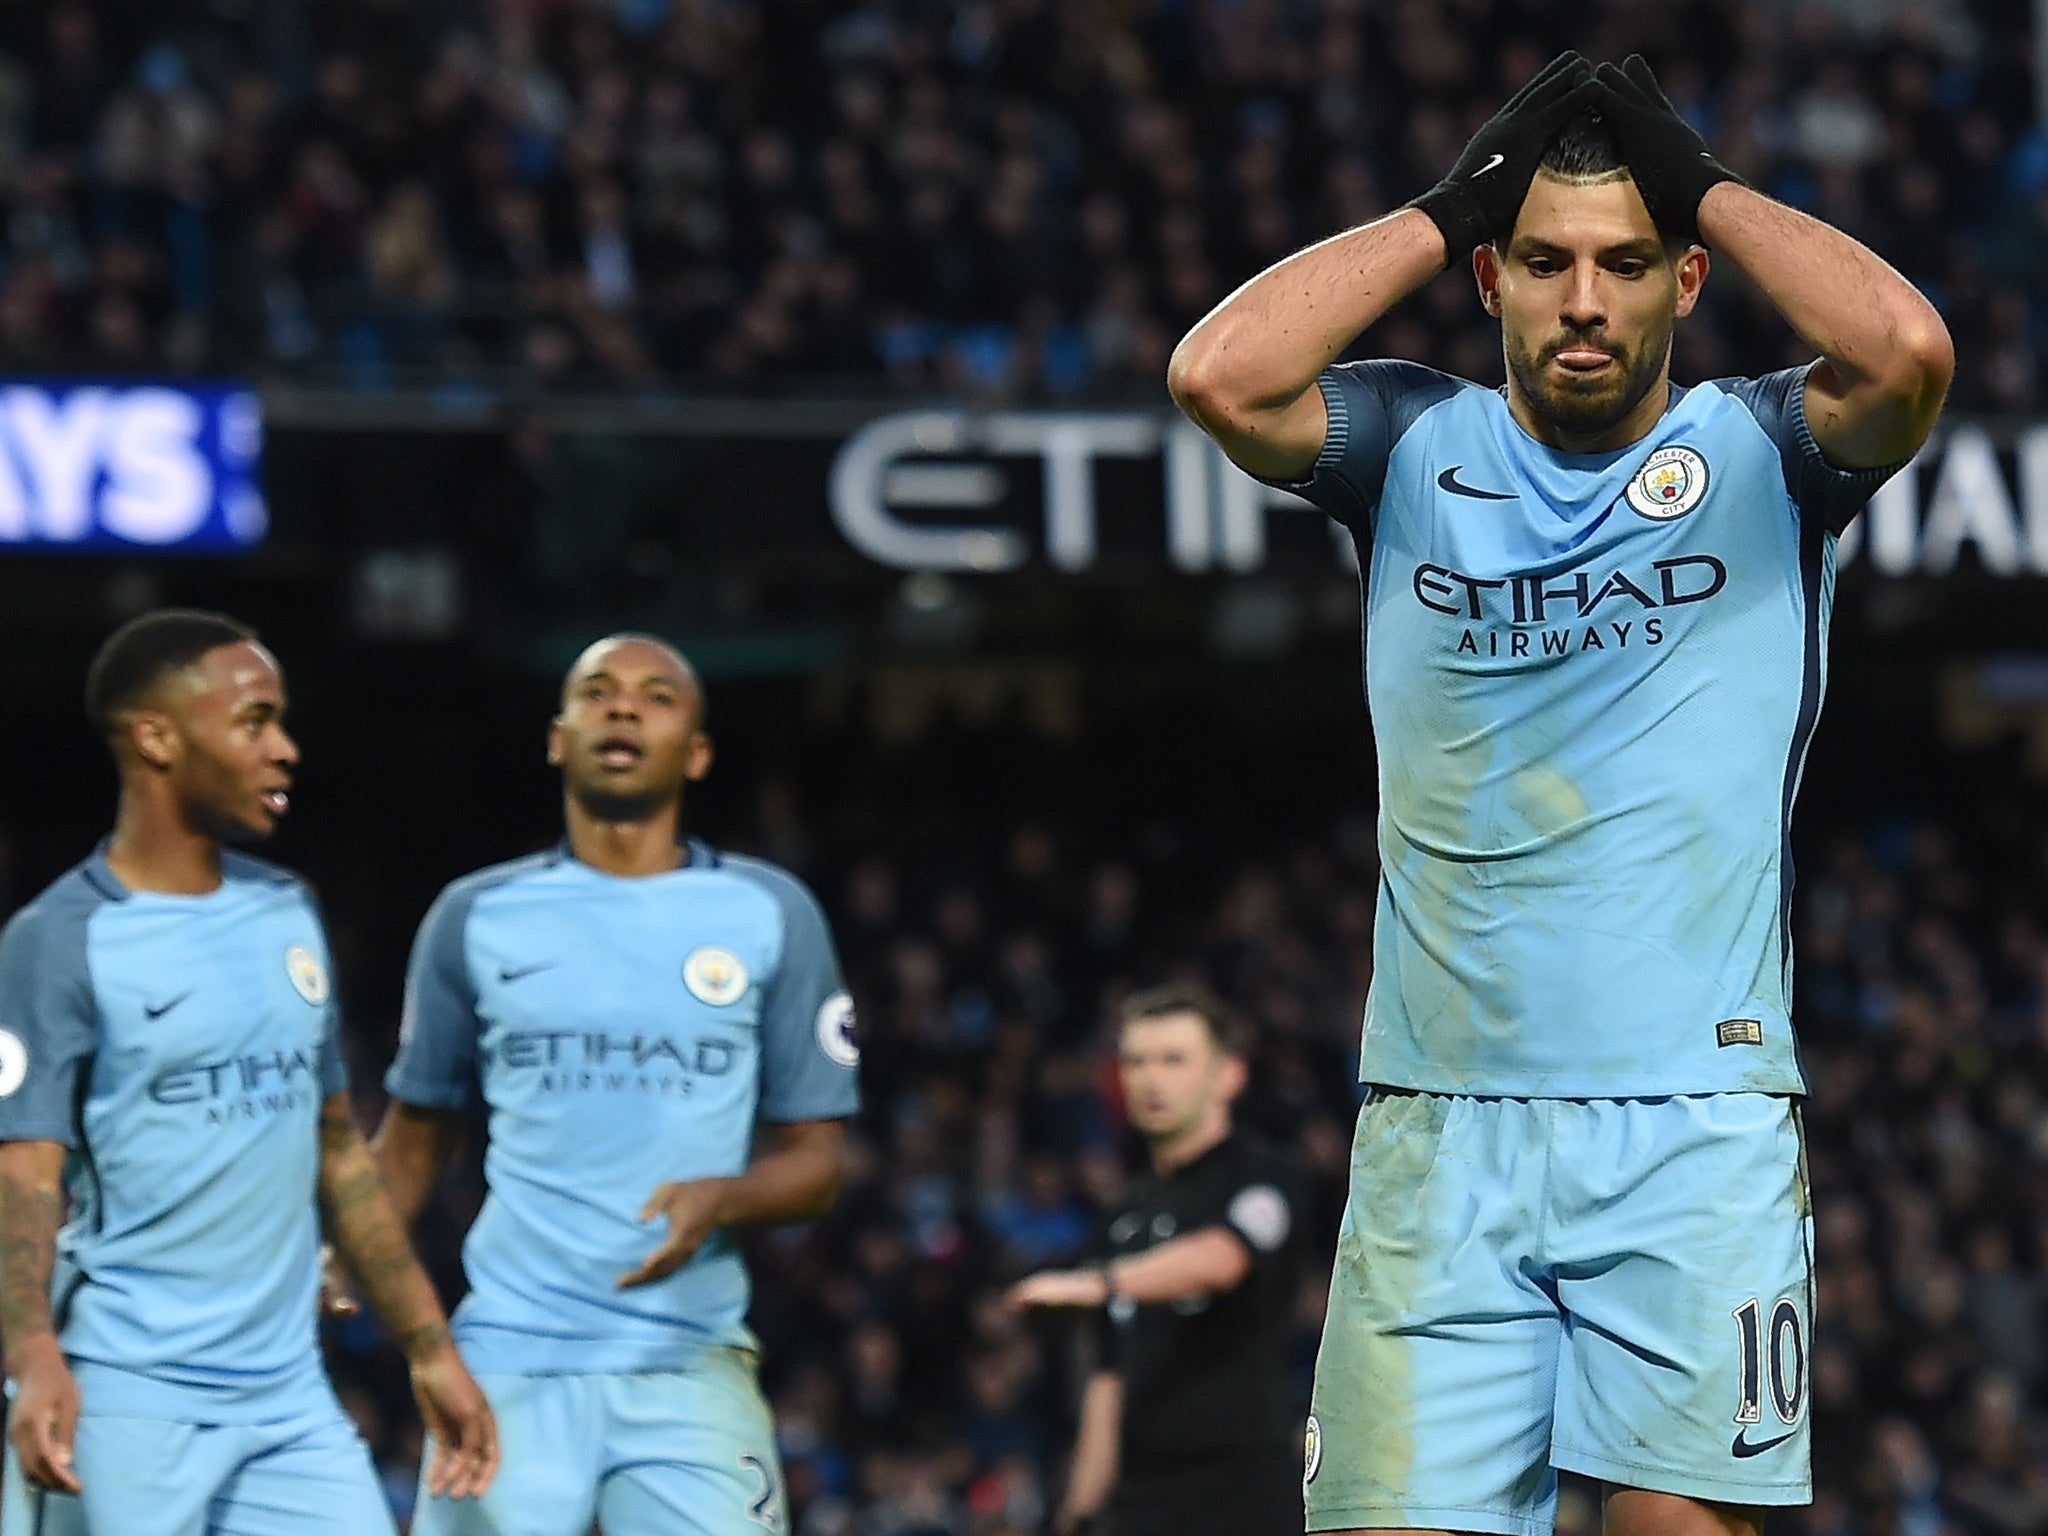 Sergio Aguero missed a simple chance to win the game for Manchester City late on